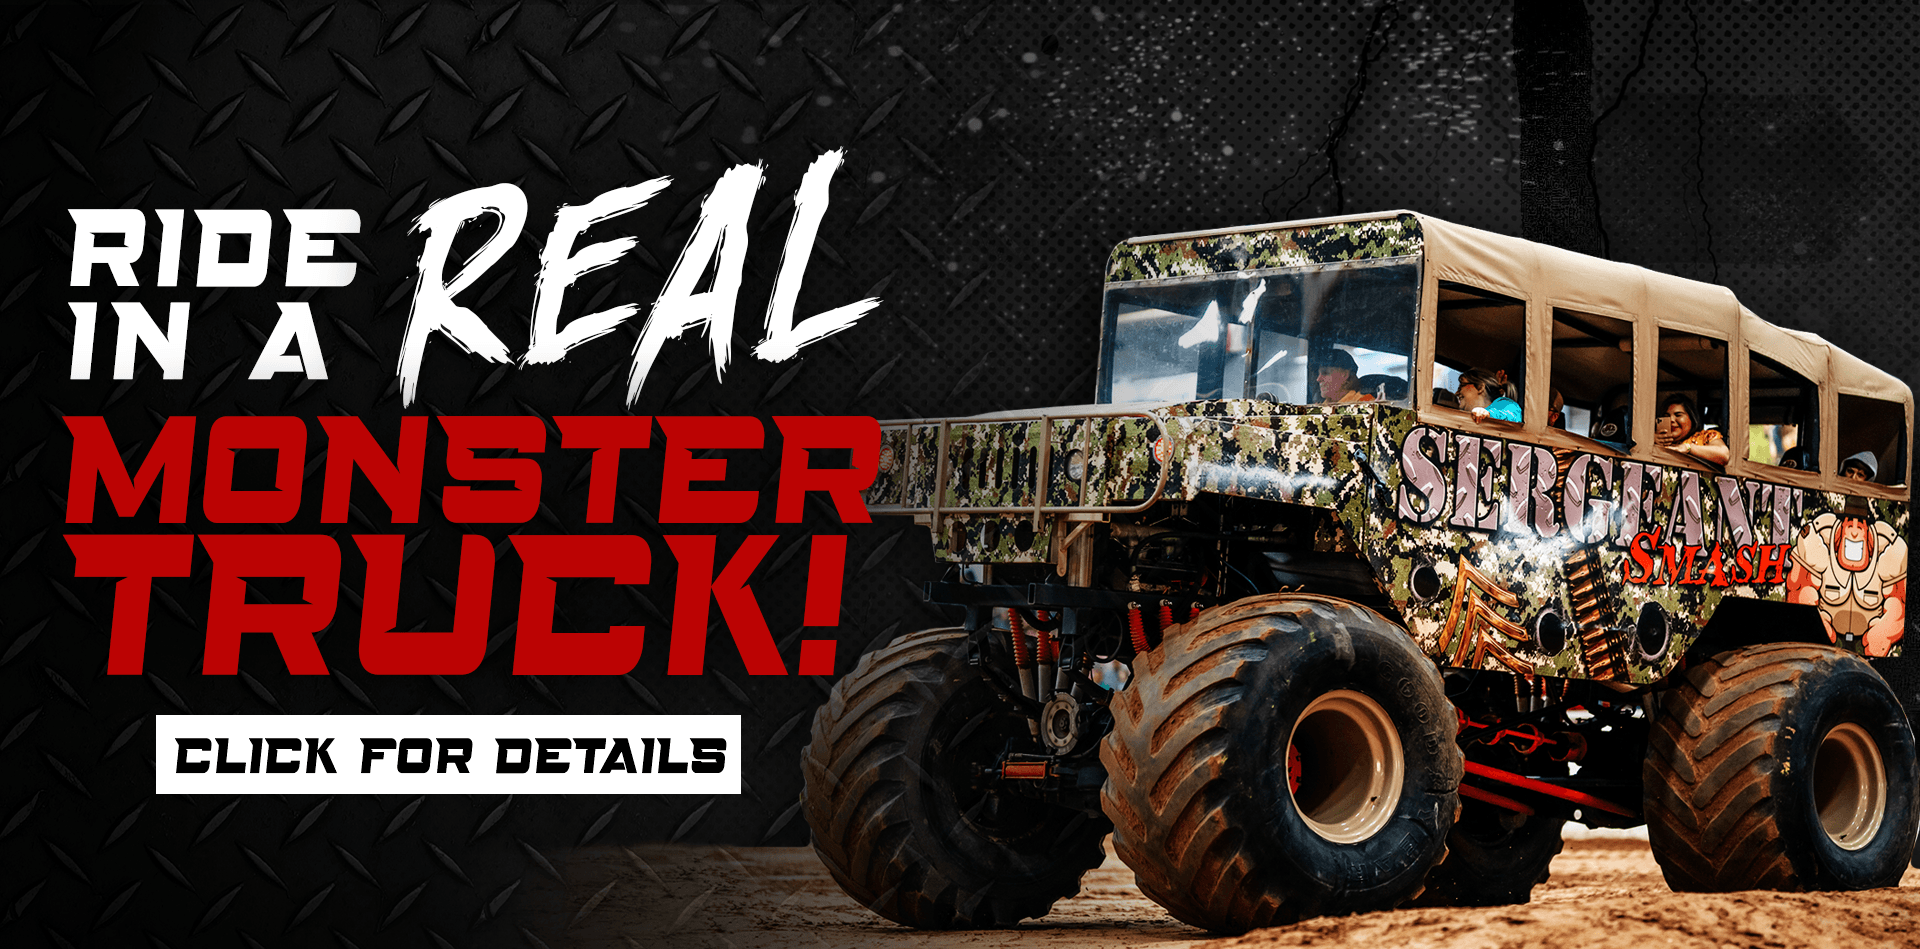 Ride in a real monster truck graphic